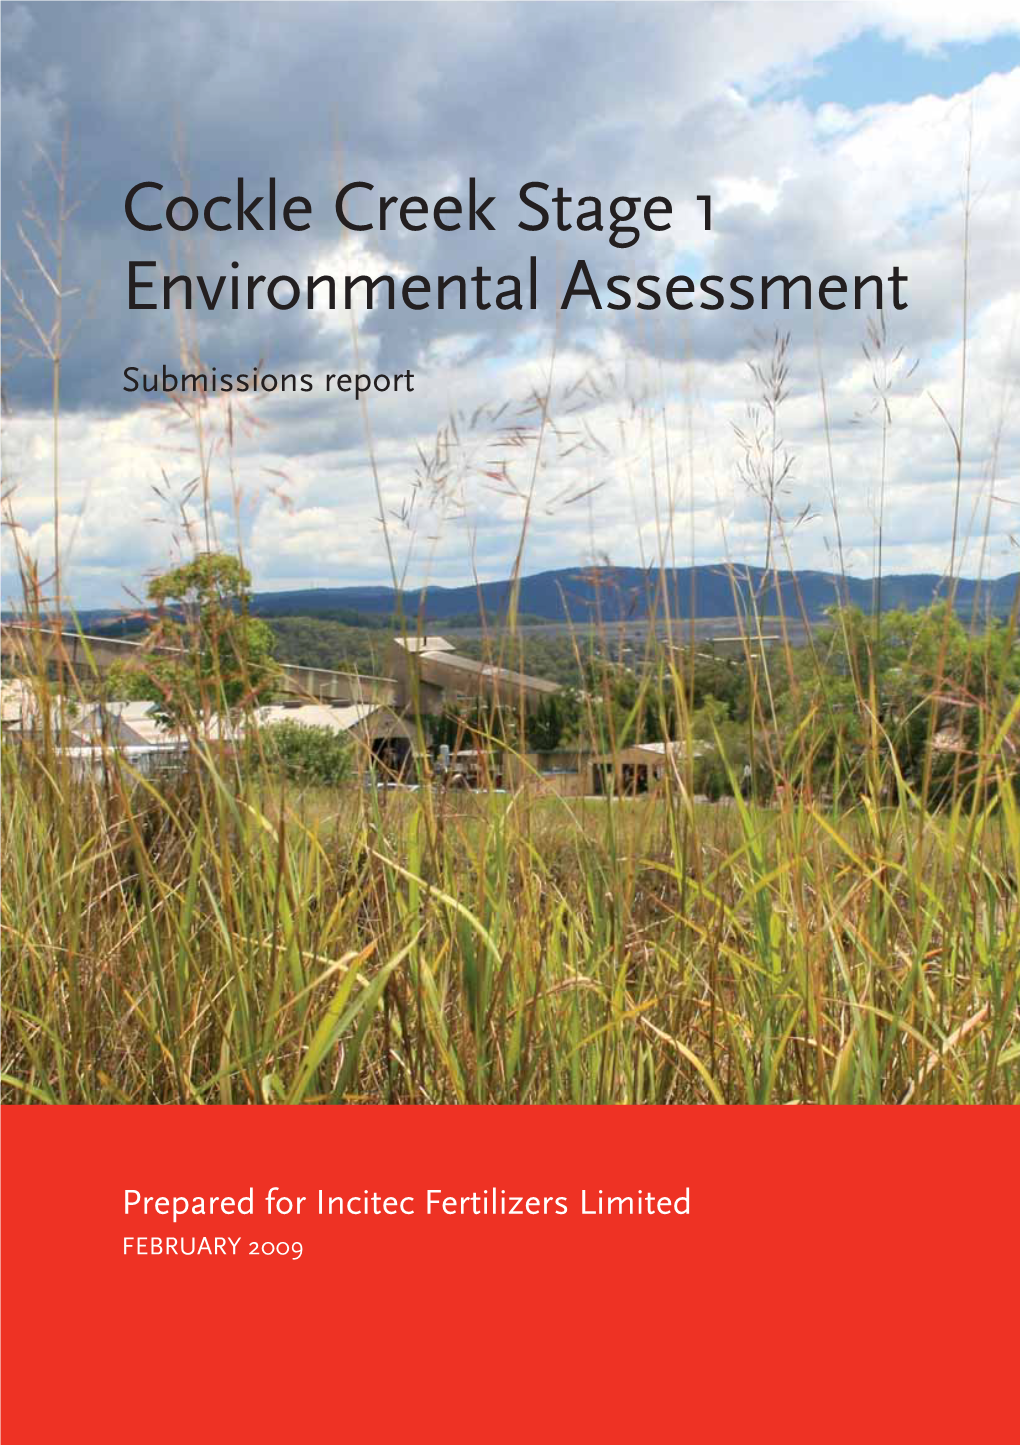 Cockle Creek Stage 1 Environmental Assessment